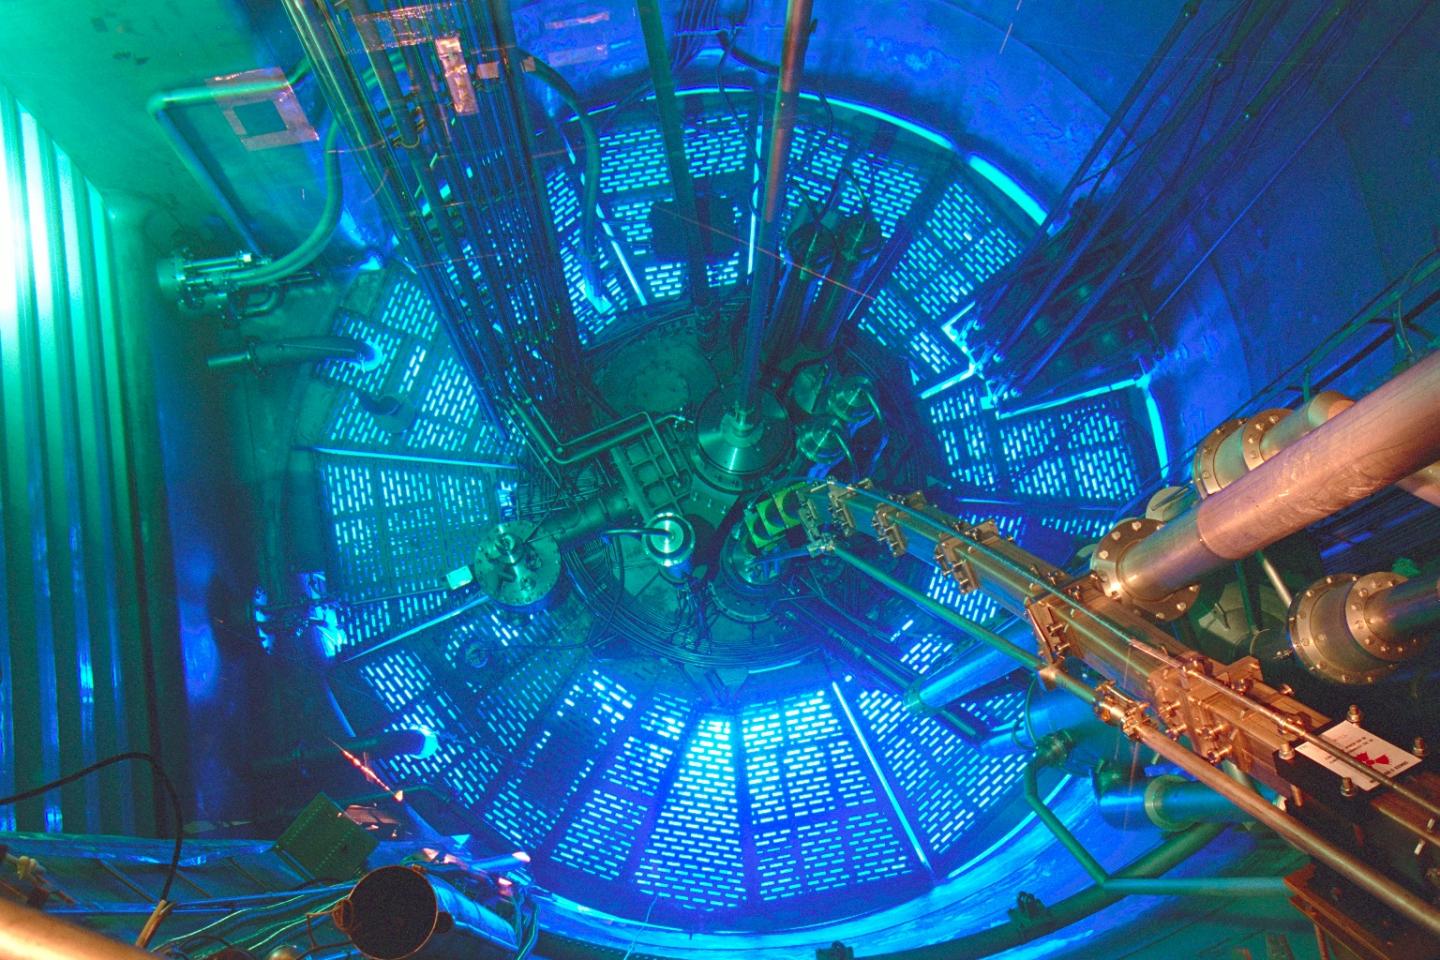 A View inside the Largest Nuclear Reactor in the World